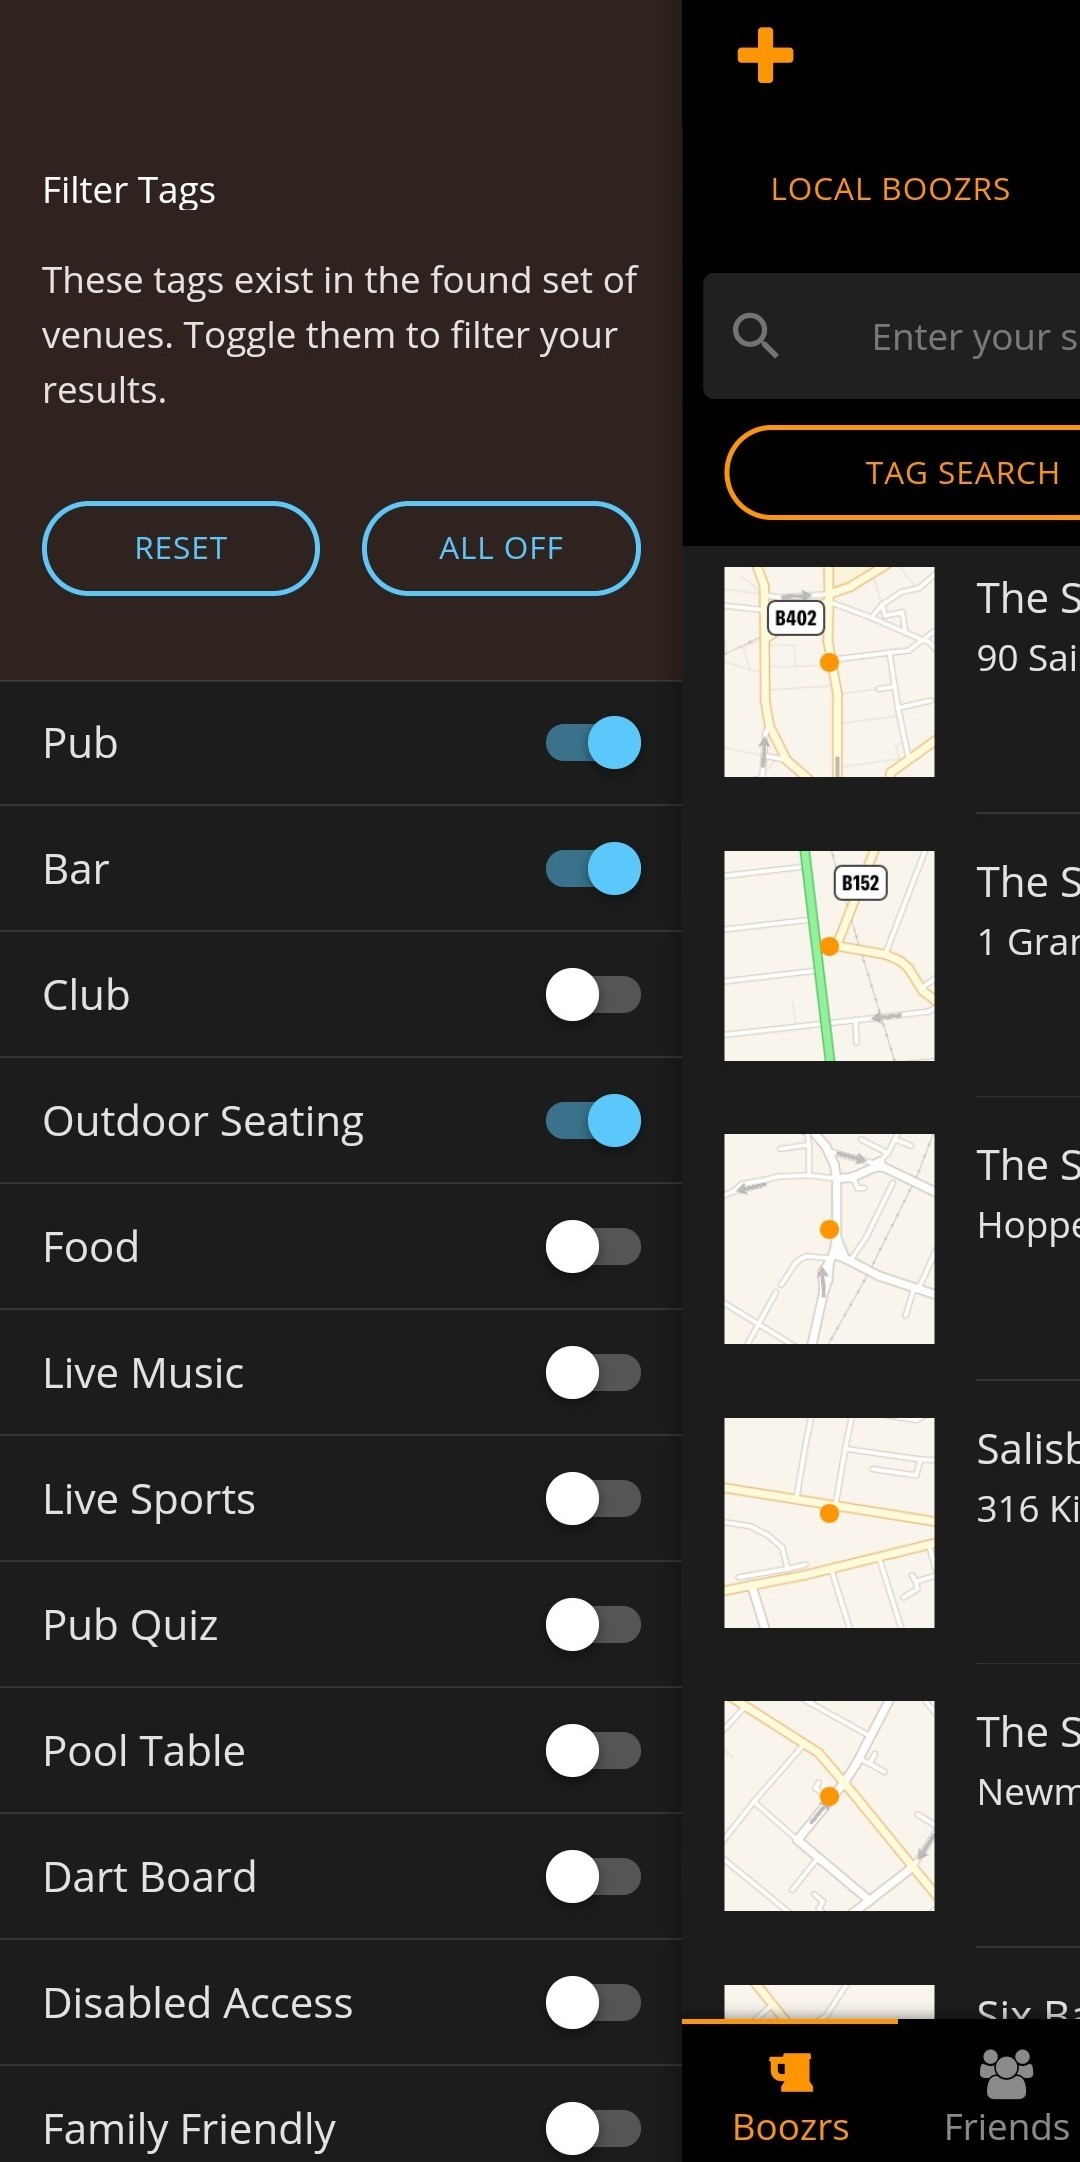 You can choose on the Boozr app if you want to search venues by outdoor seating 